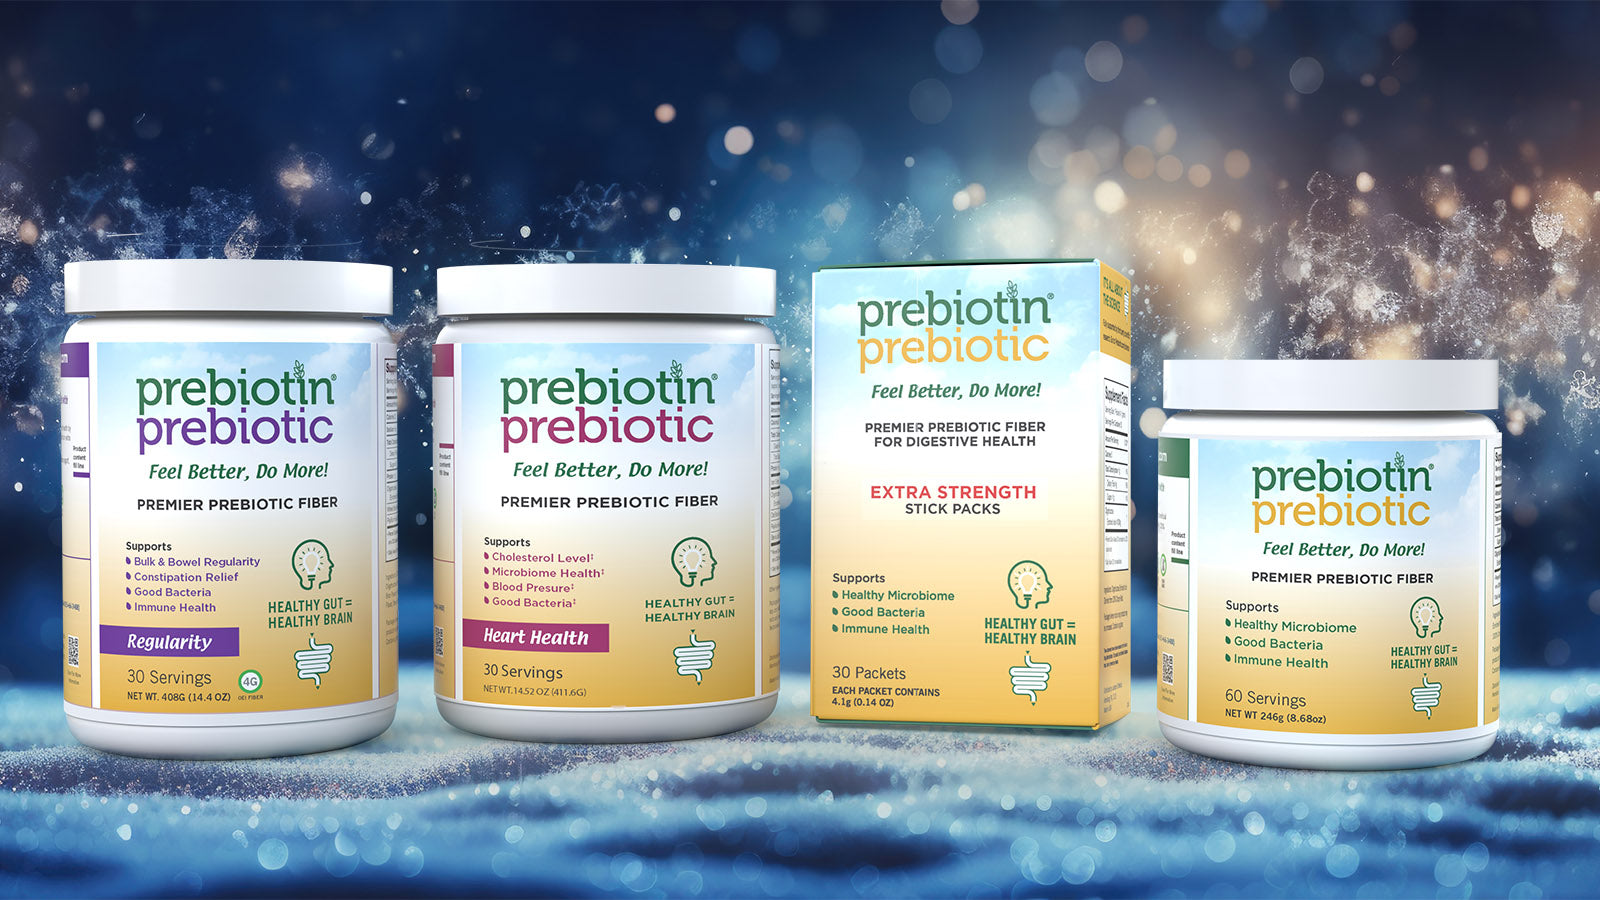 Image of Prebiotin Products